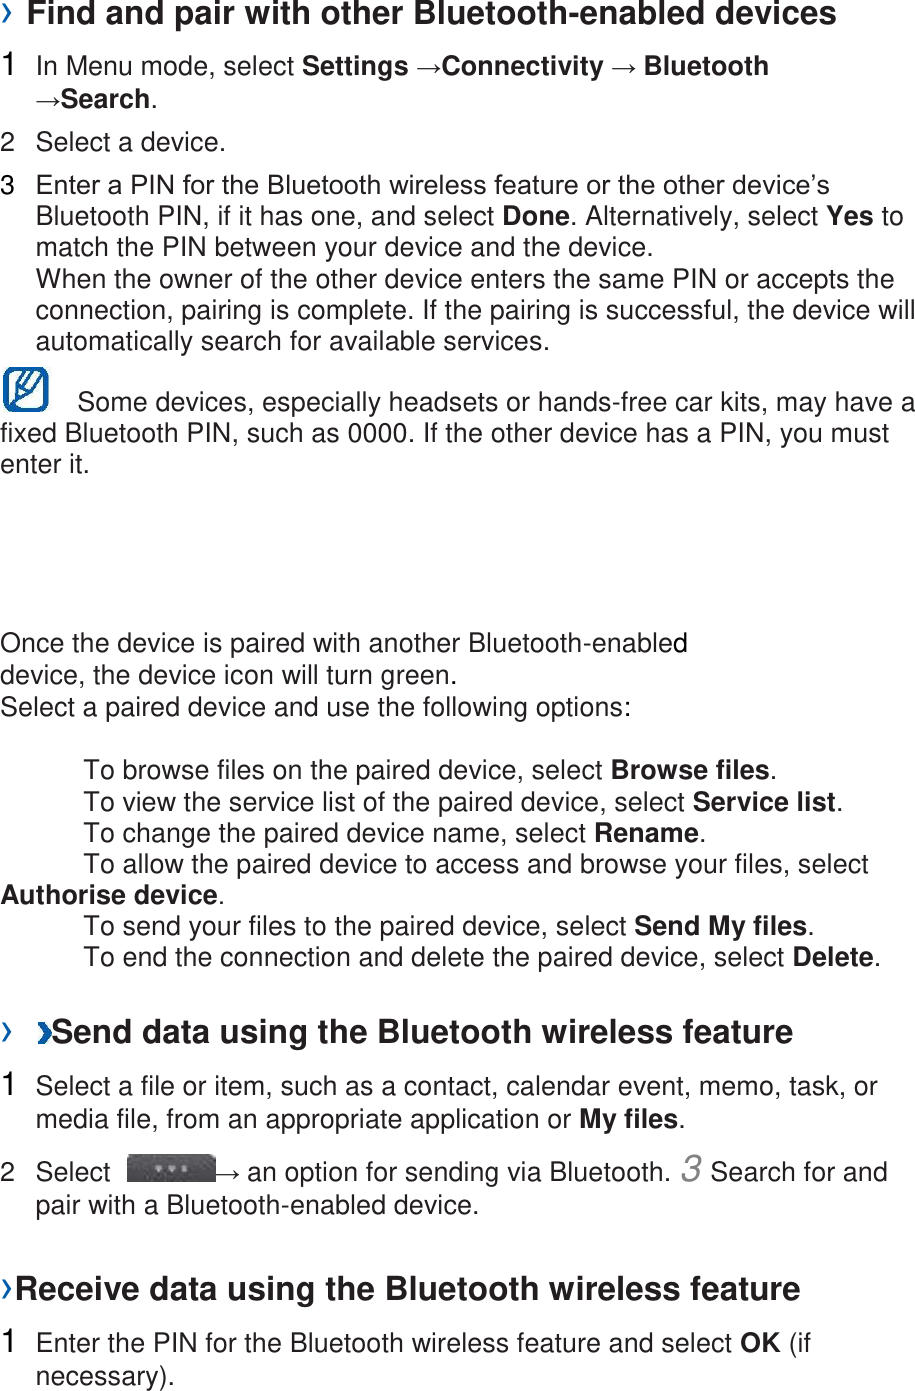 › Find and pair with other Bluetooth-enabled devices   1  In Menu mode, select Settings →Connectivity → Bluetooth →Search.   2  Select a device.   3  Enter a PIN for the Bluetooth wireless feature or the other device’s Bluetooth PIN, if it has one, and select Done. Alternatively, select Yes to match the PIN between your device and the device.   When the owner of the other device enters the same PIN or accepts the connection, pairing is complete. If the pairing is successful, the device will automatically search for available services.     Some devices, especially headsets or hands-free car kits, may have a fixed Bluetooth PIN, such as 0000. If the other device has a PIN, you must enter it.   Once the device is paired with another Bluetooth-enabled device, the device icon will turn green. Select a paired device and use the following options:    To browse files on the paired device, select Browse files.     To view the service list of the paired device, select Service list.     To change the paired device name, select Rename.    To allow the paired device to access and browse your files, select Authorise device.     To send your files to the paired device, select Send My files.     To end the connection and delete the paired device, select Delete.    ›  Send data using the Bluetooth wireless feature   1  Select a file or item, such as a contact, calendar event, memo, task, or media file, from an appropriate application or My files.   2  Select  → an option for sending via Bluetooth. 3 Search for and pair with a Bluetooth-enabled device.   ›Receive data using the Bluetooth wireless feature   1  Enter the PIN for the Bluetooth wireless feature and select OK (if necessary).   